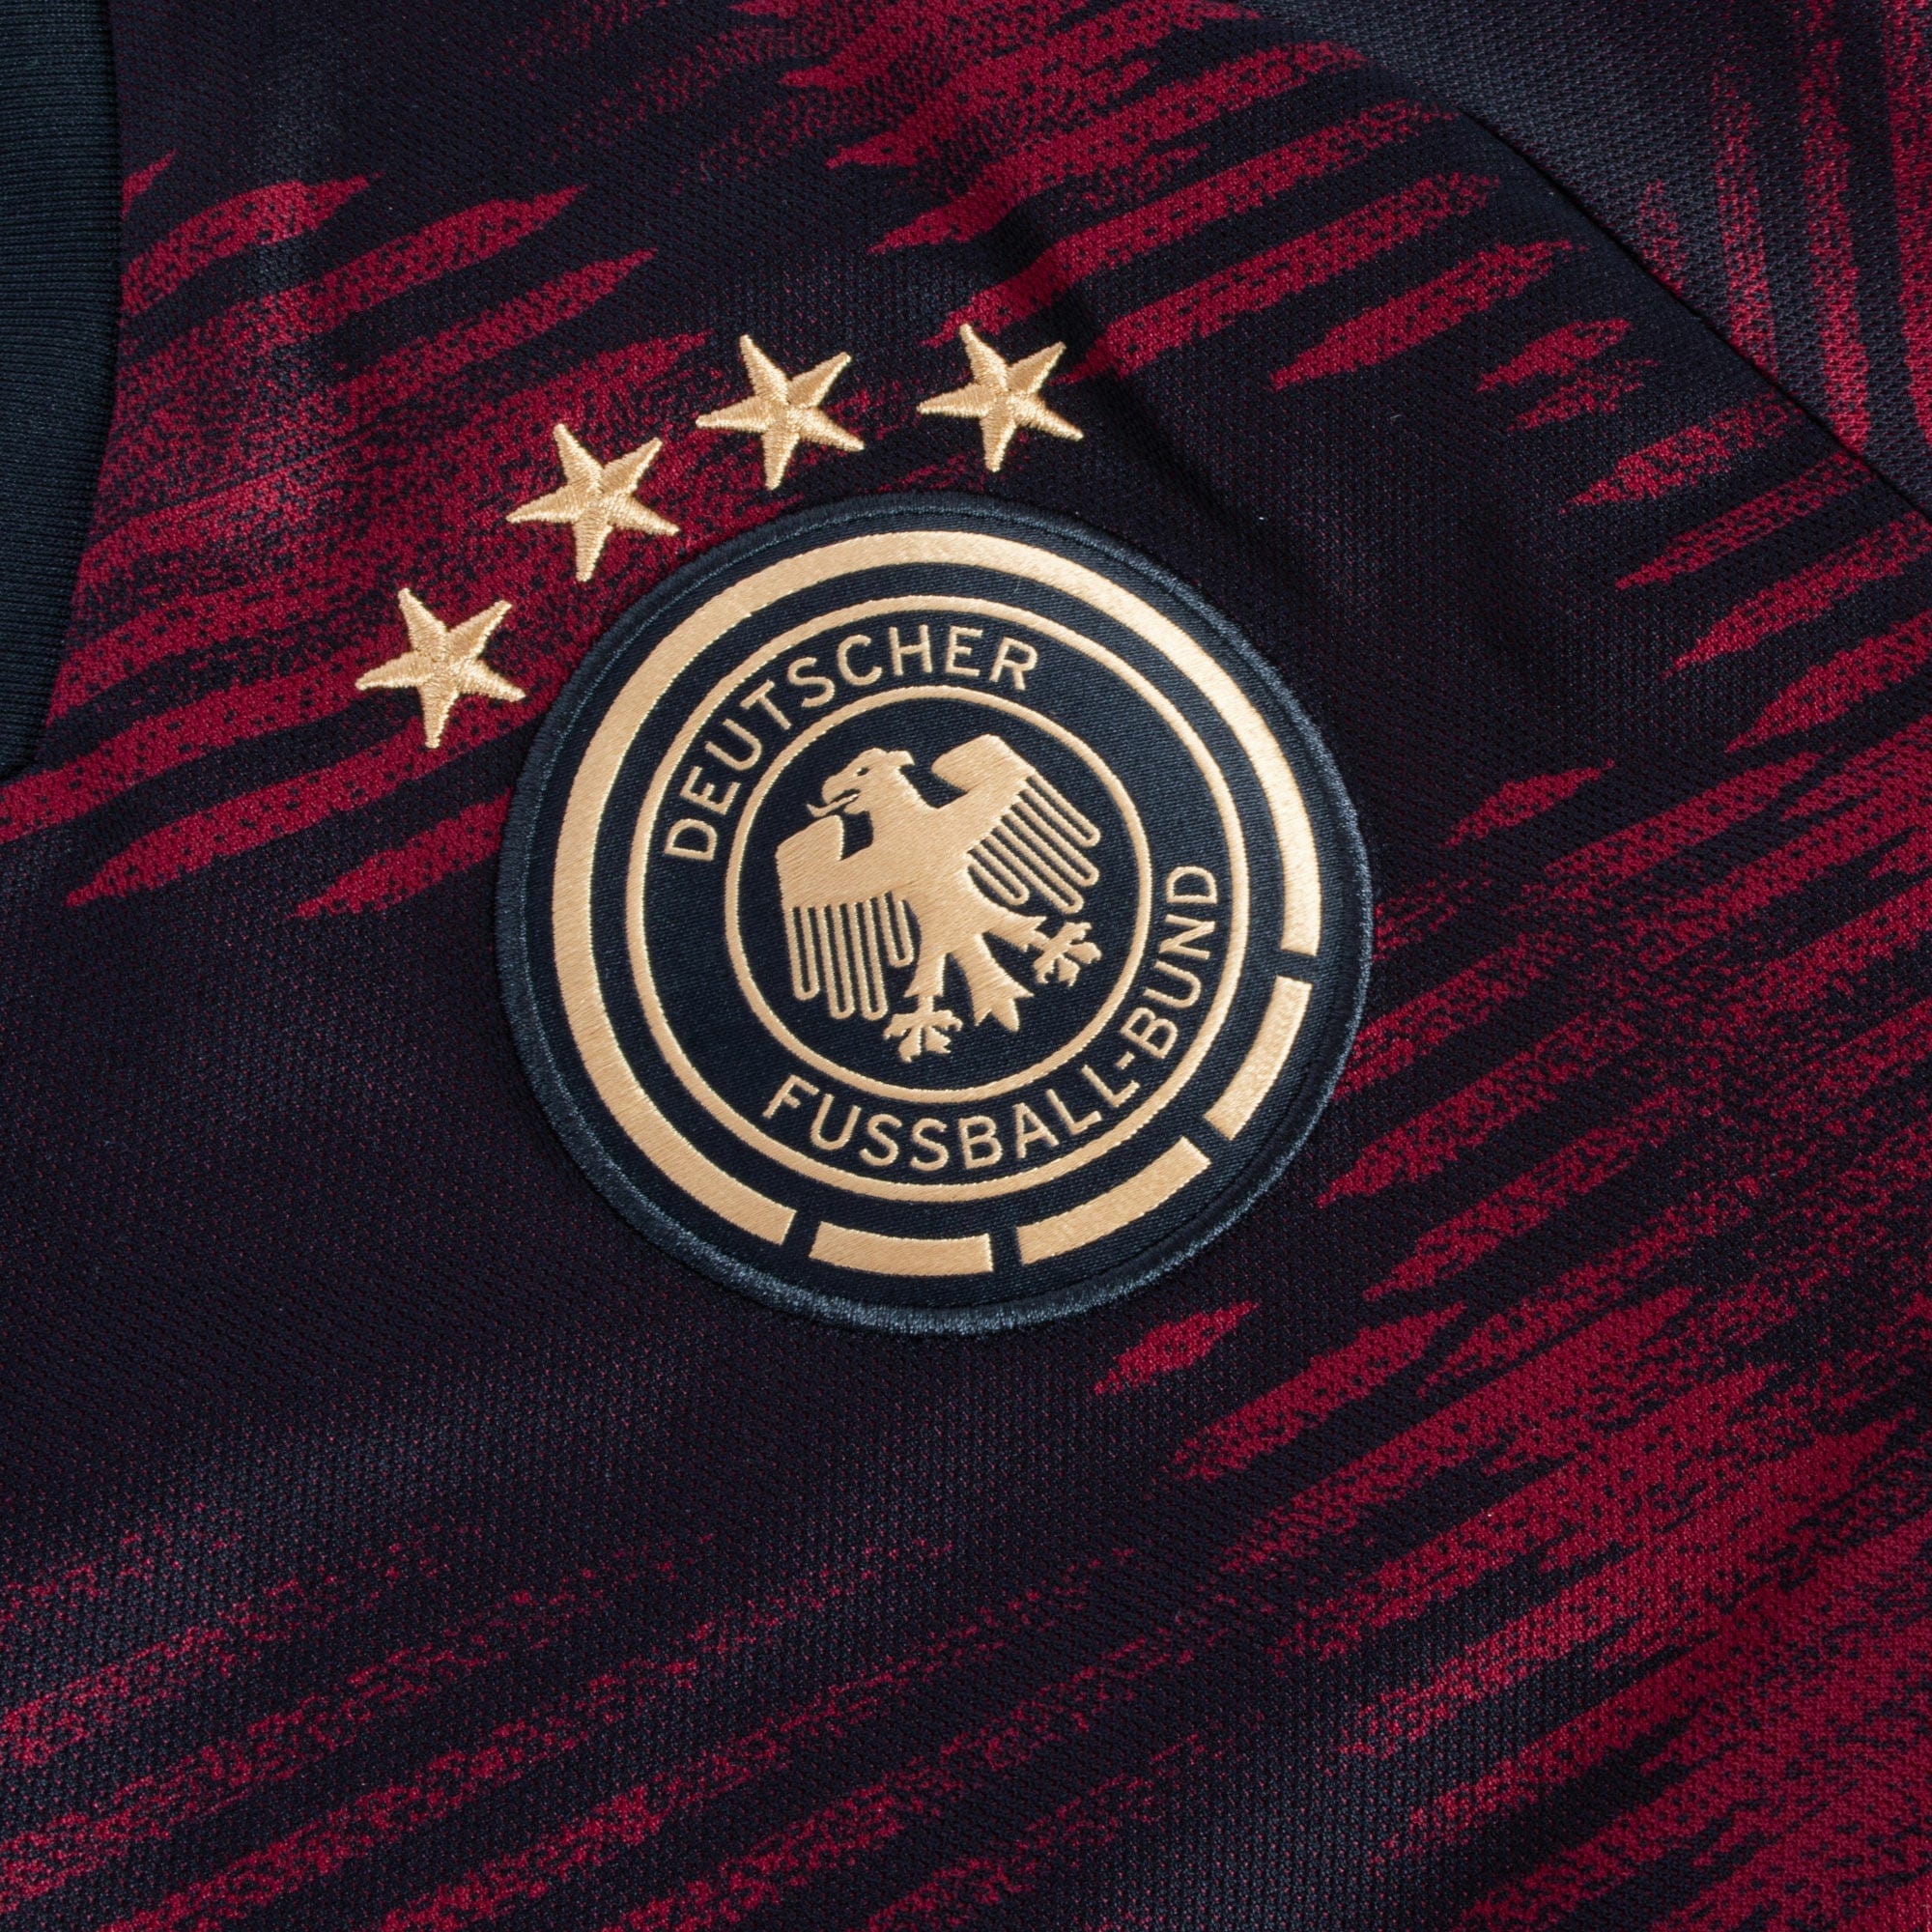 Germany Away Jersey 22/23 Euro 2024 Qualification